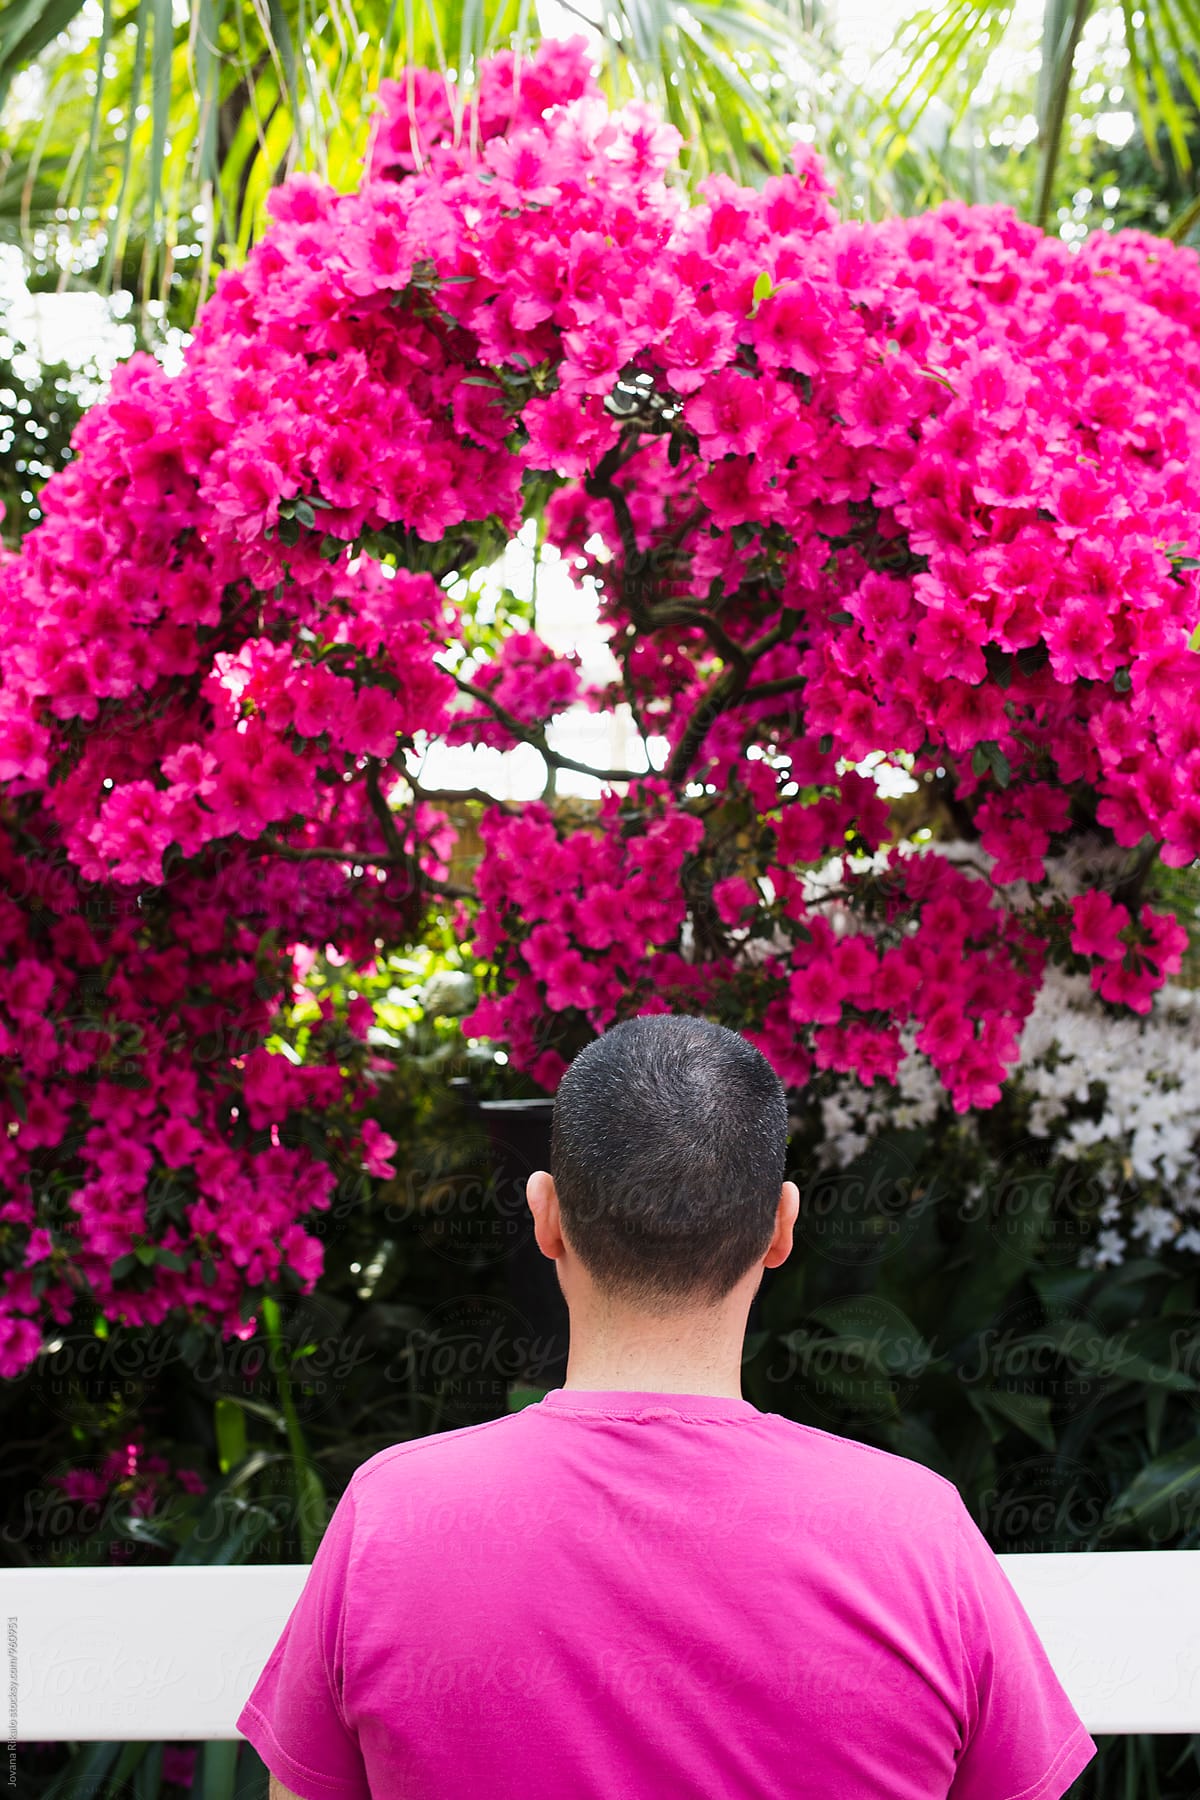 Back view of a man wearing a pink shirt and pink flowers